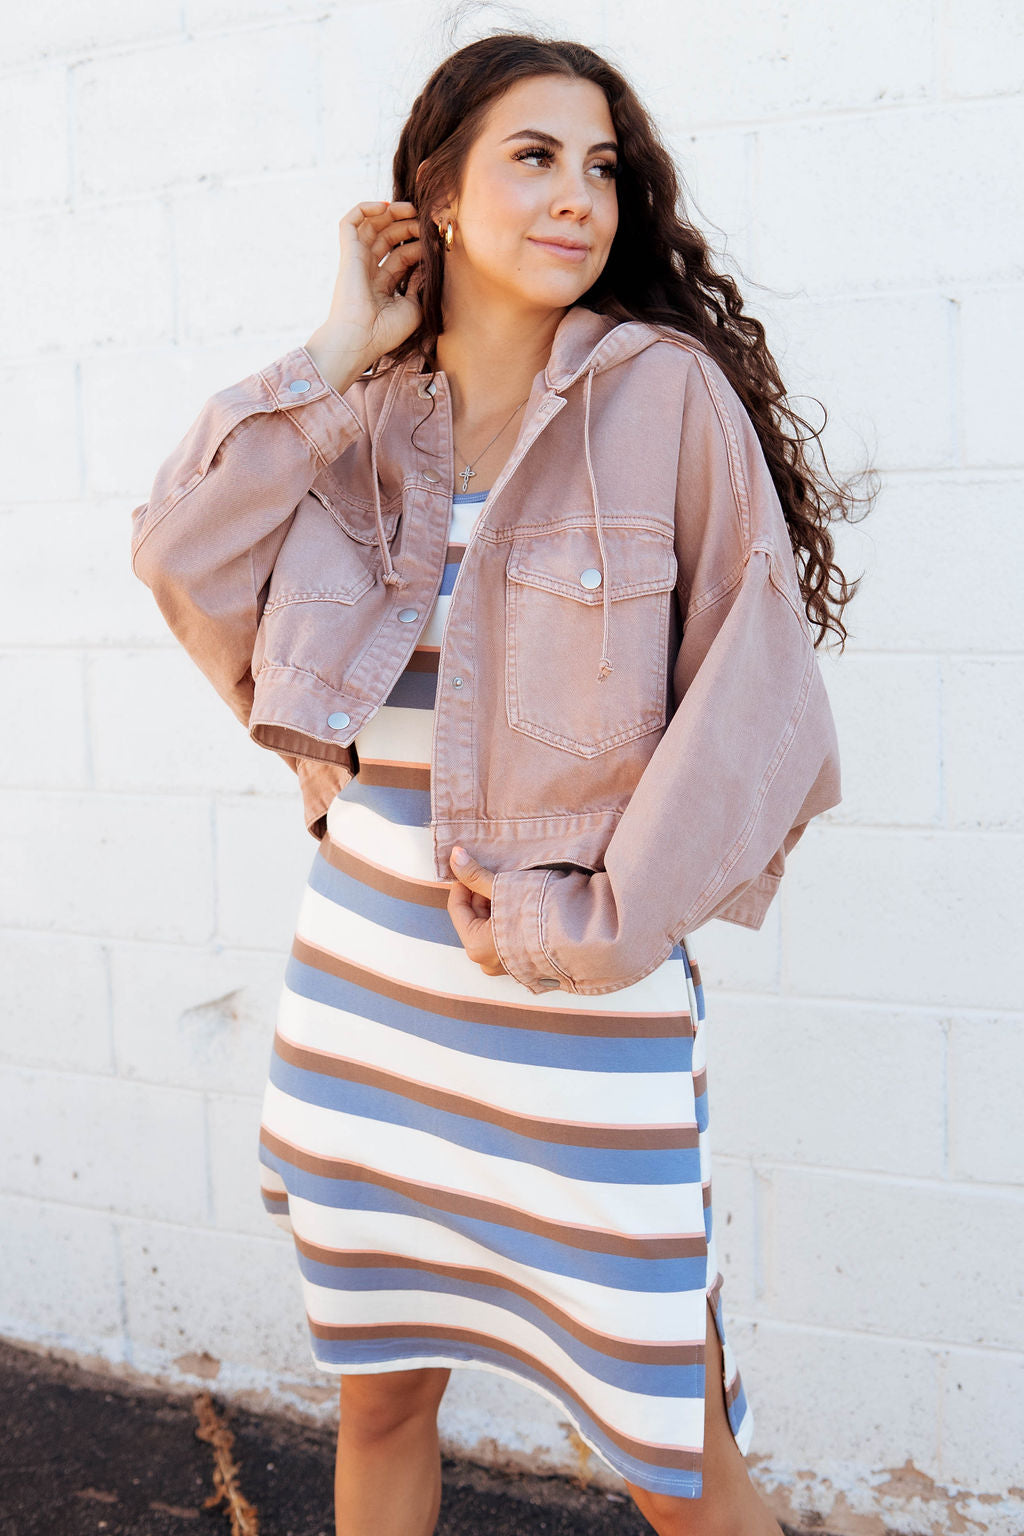 Oversized boyfriend jacket perfect for fall in a dusty pink color